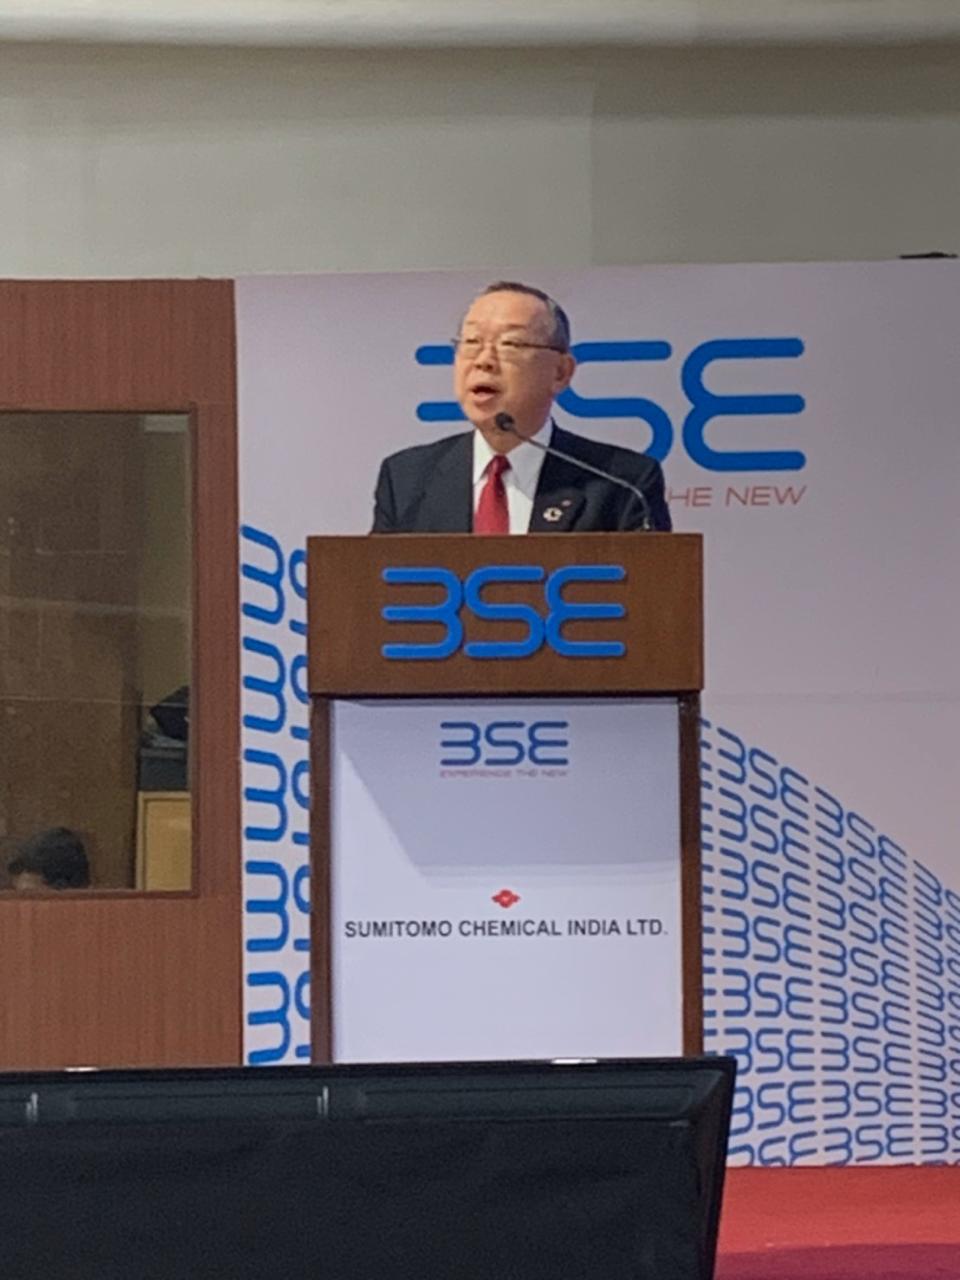 Mr. Ray Nishimoto, Representative Director & Executive Vice President, Sumitomo Chemical Japan while addressing the gathering at the listing ceremony of Sumitomo Chemical India Ltd held today in Mumbai at BSE.  